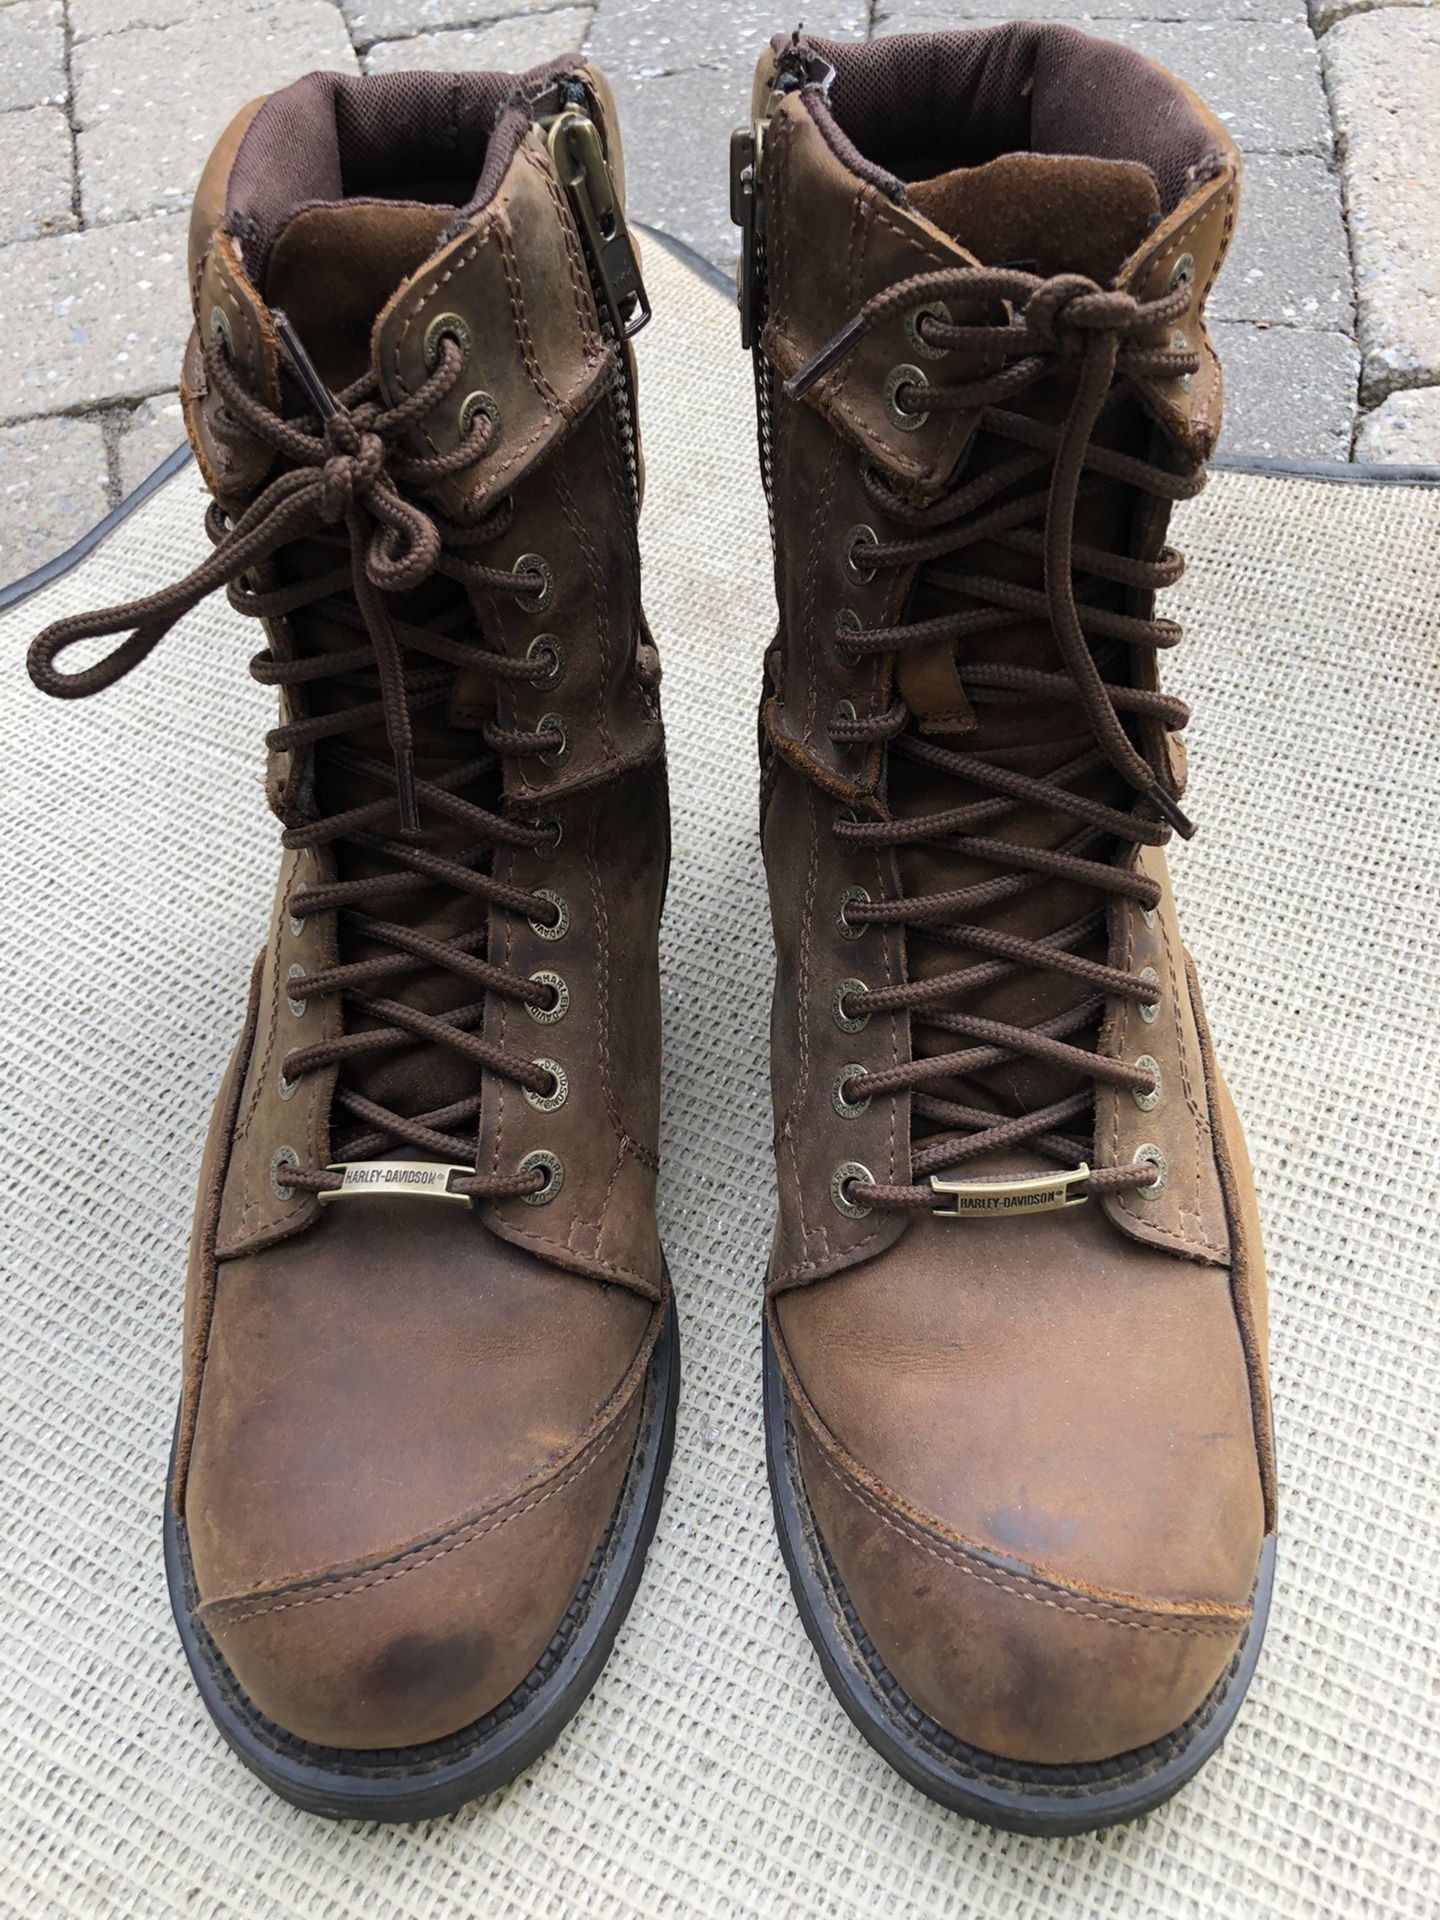 Harley-Davidson Motorcycle Boots size13